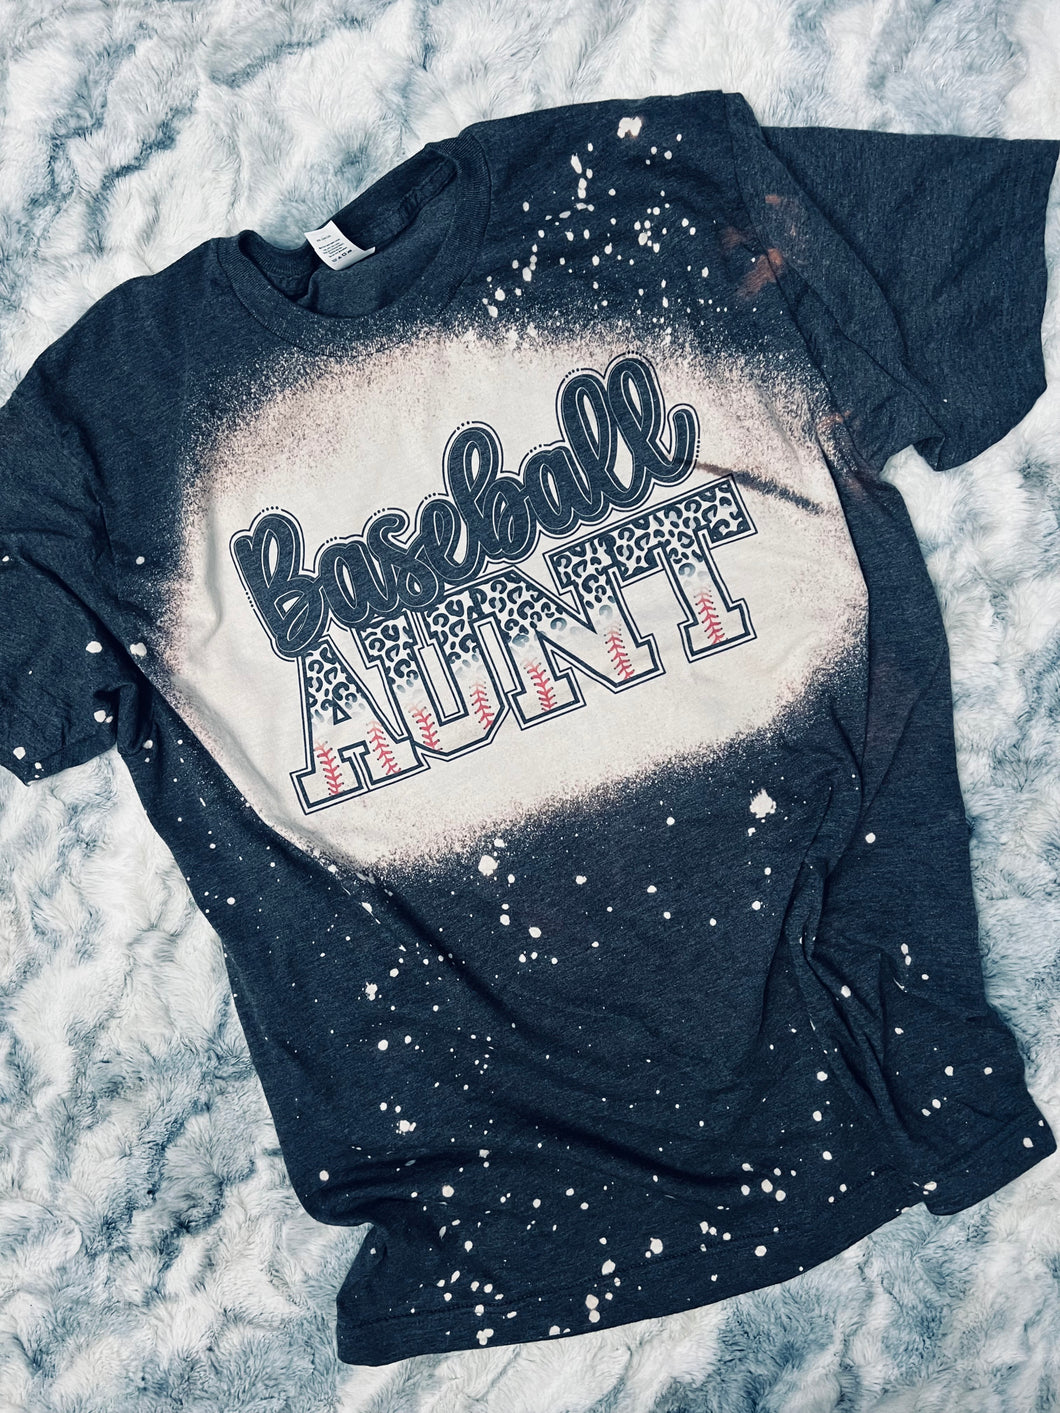 Baseball Aunt. bleached graphic tee long sleeve crew or hoodie - Mavictoria Designs Hot Press Express